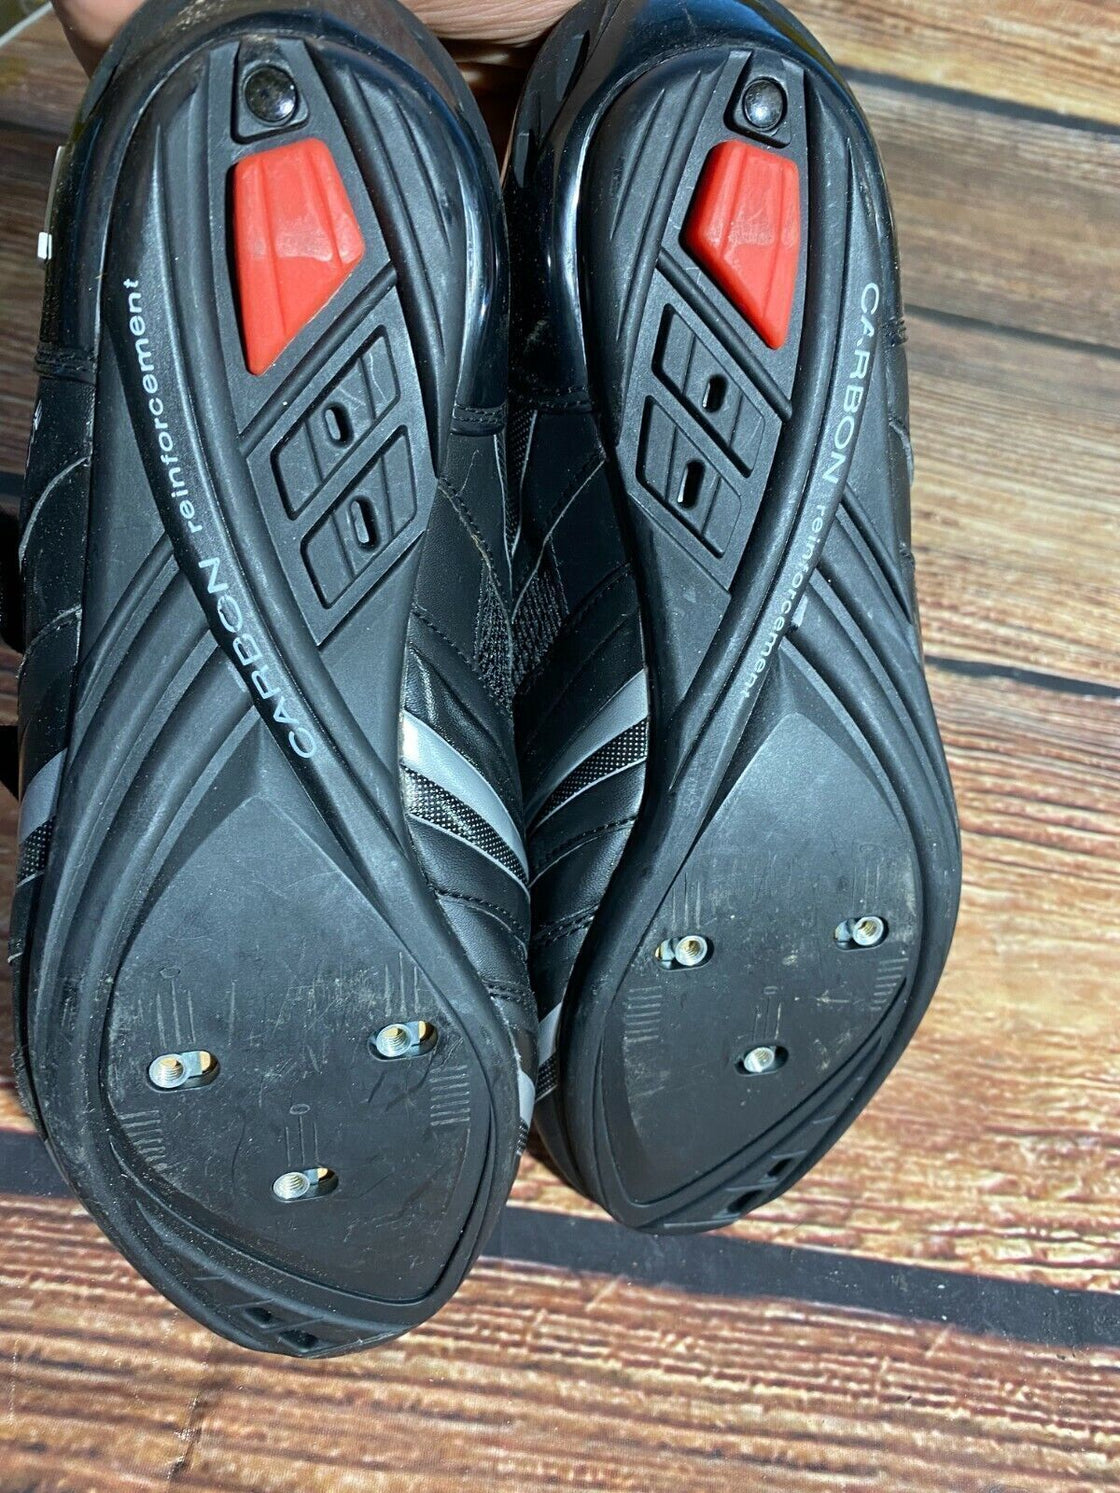 NORTHWAVE Road Cycling Shoes Road Bike Boots 3 Bolts Size EU40